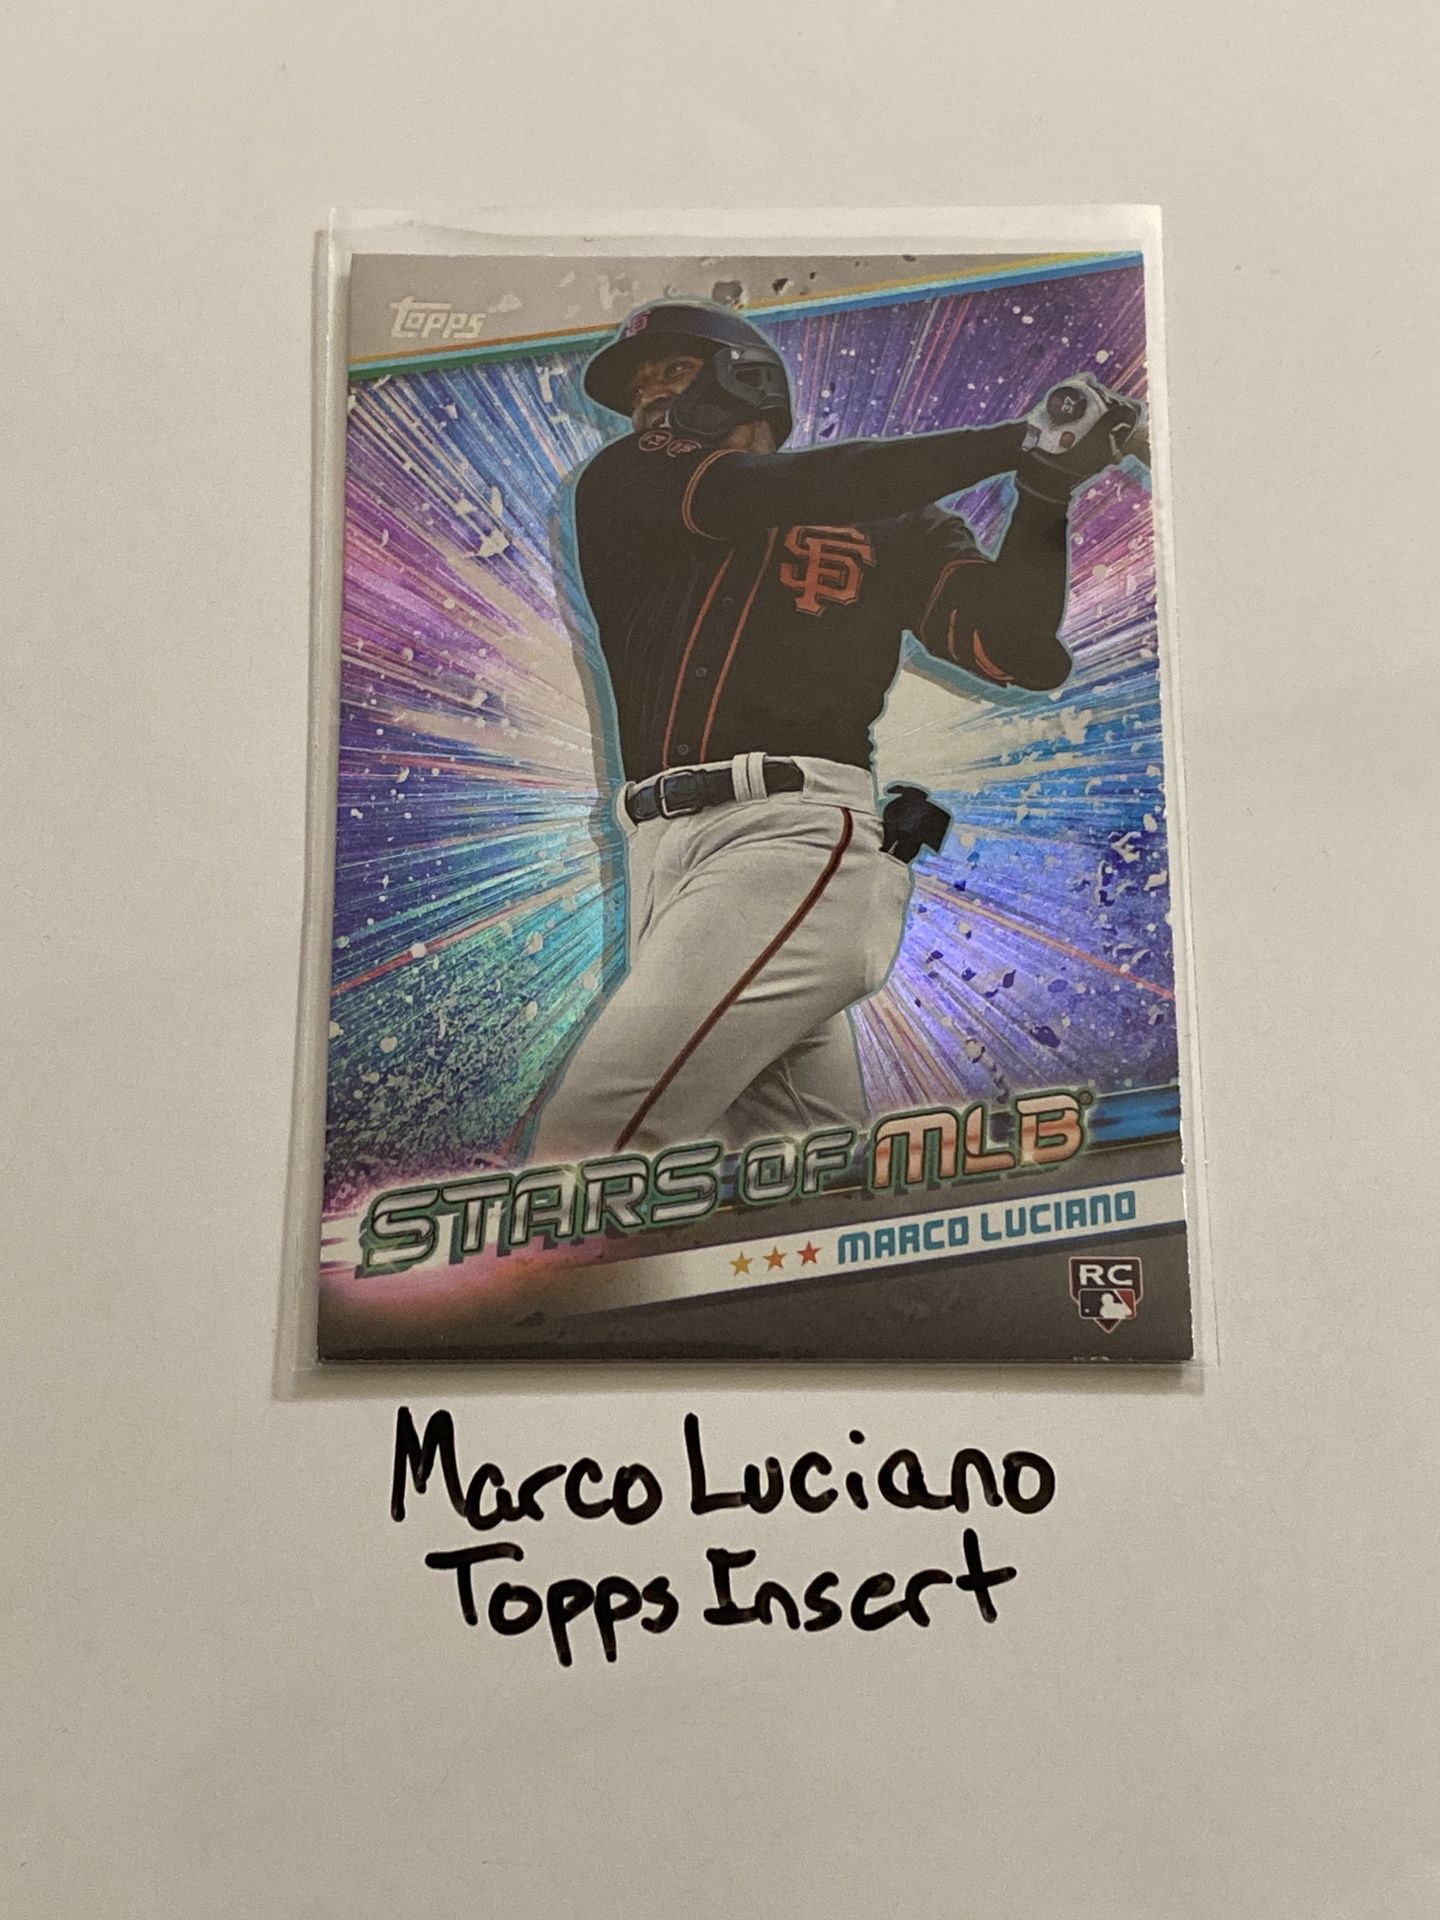 Marco Luciano San Francisco Giants Shortstop Topps Short Print Insert Rookie Card. 